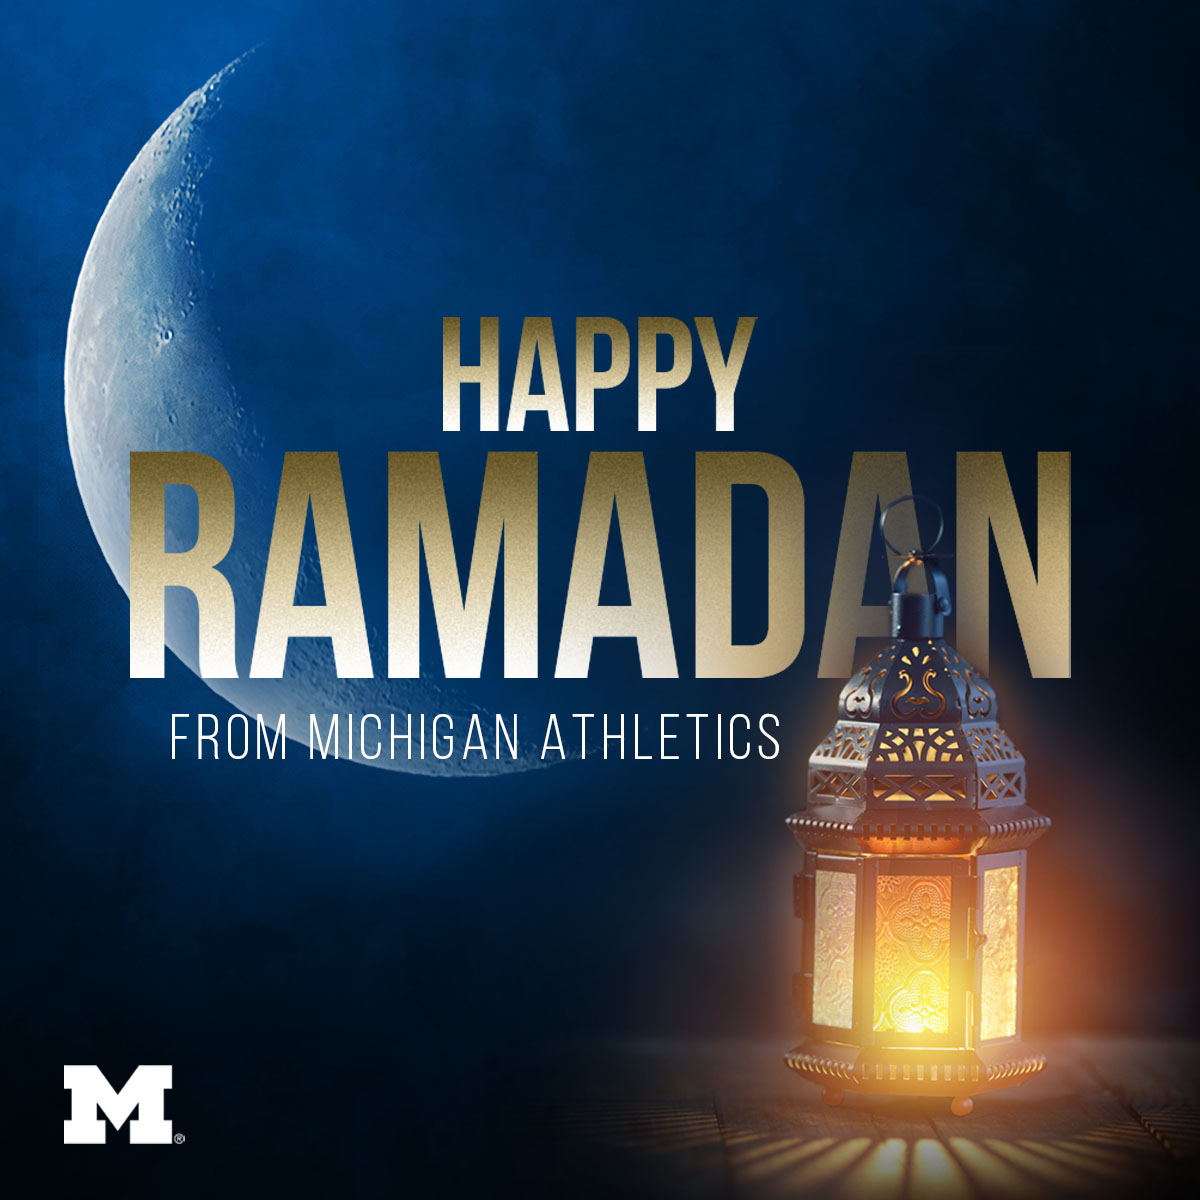 Ramadan Kareem to all! May this month bring you happiness, prosperity, and love.